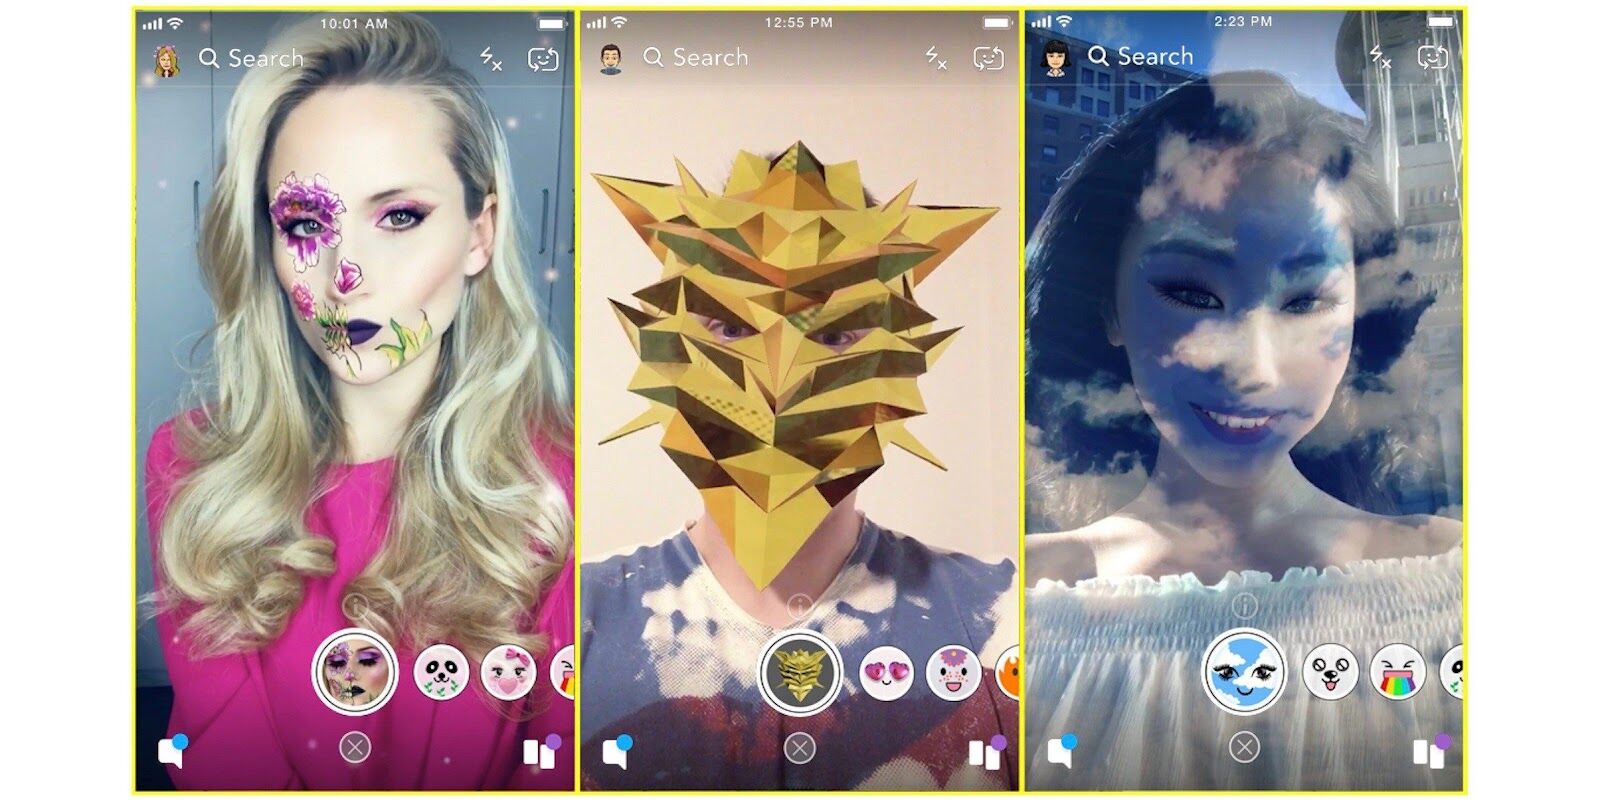 how to create an app like Snapchat with lenses